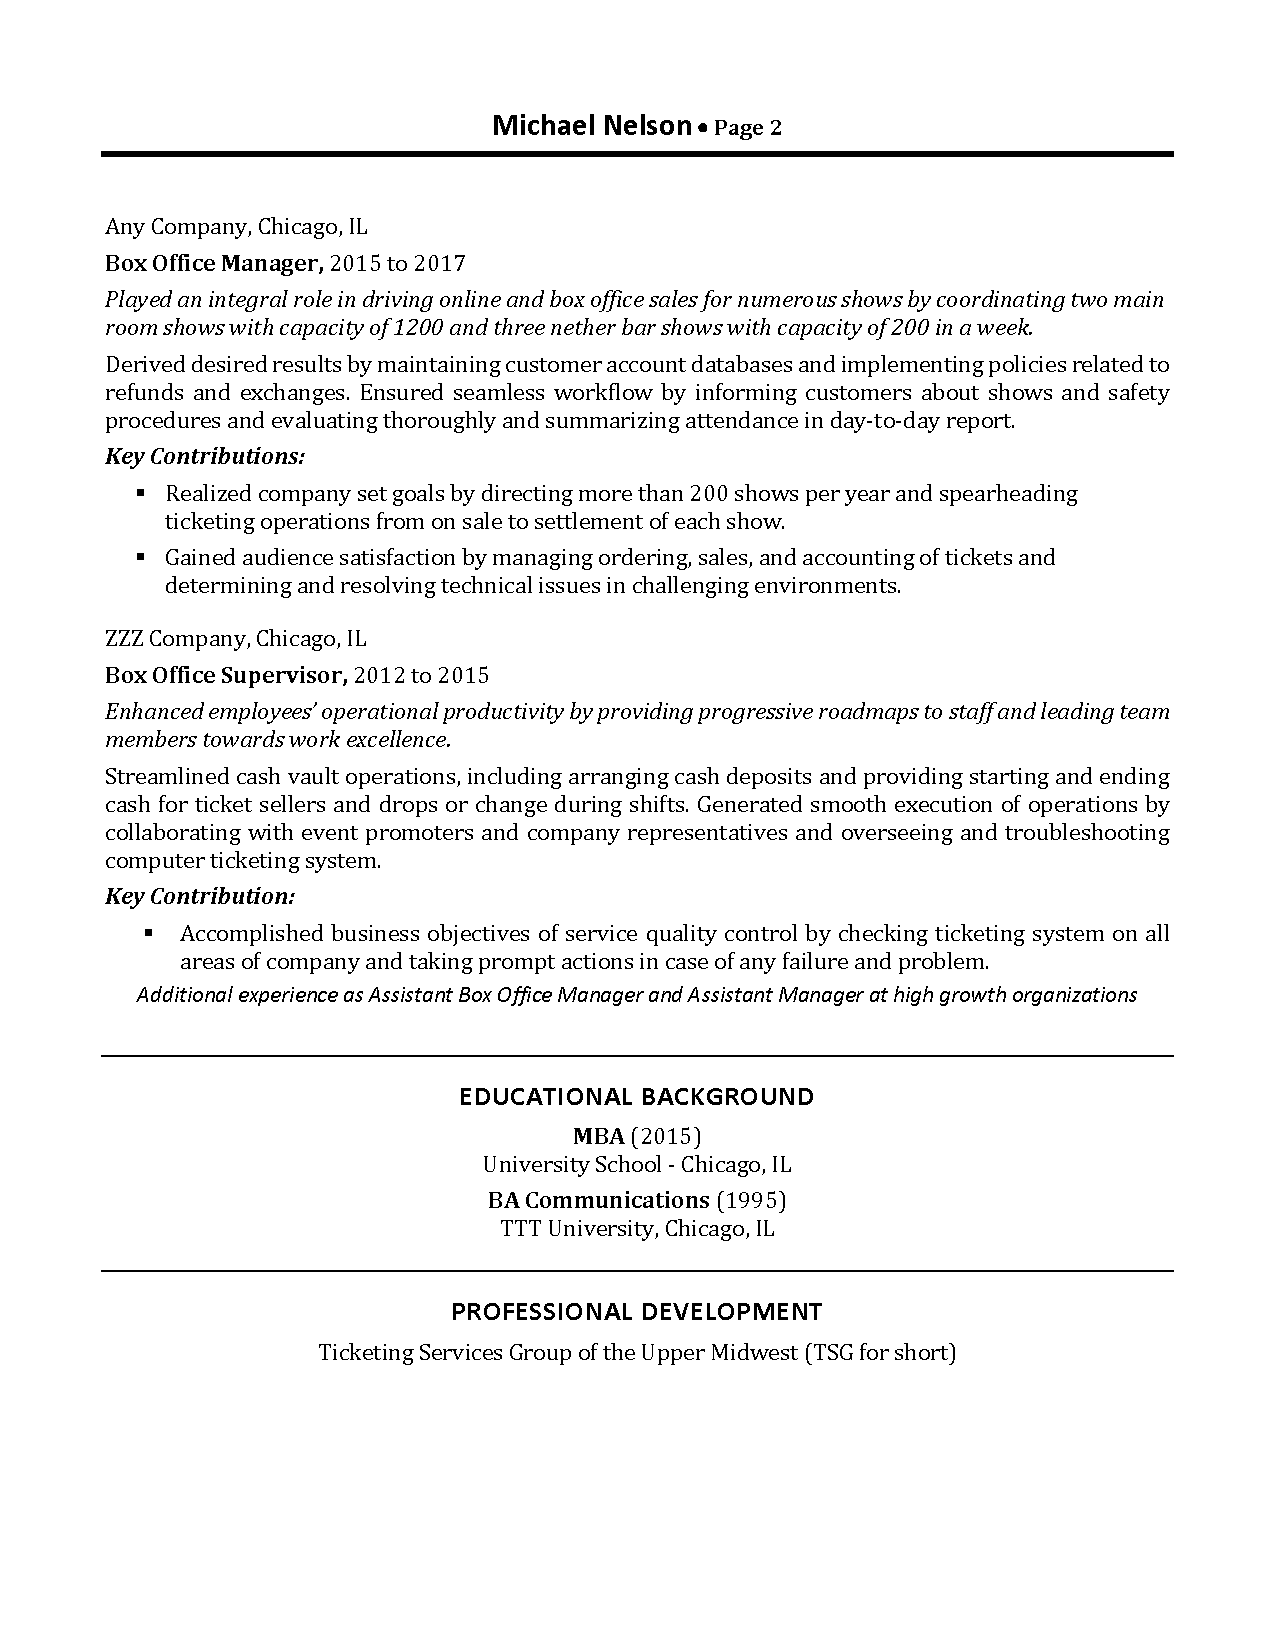 box office manager resume Page